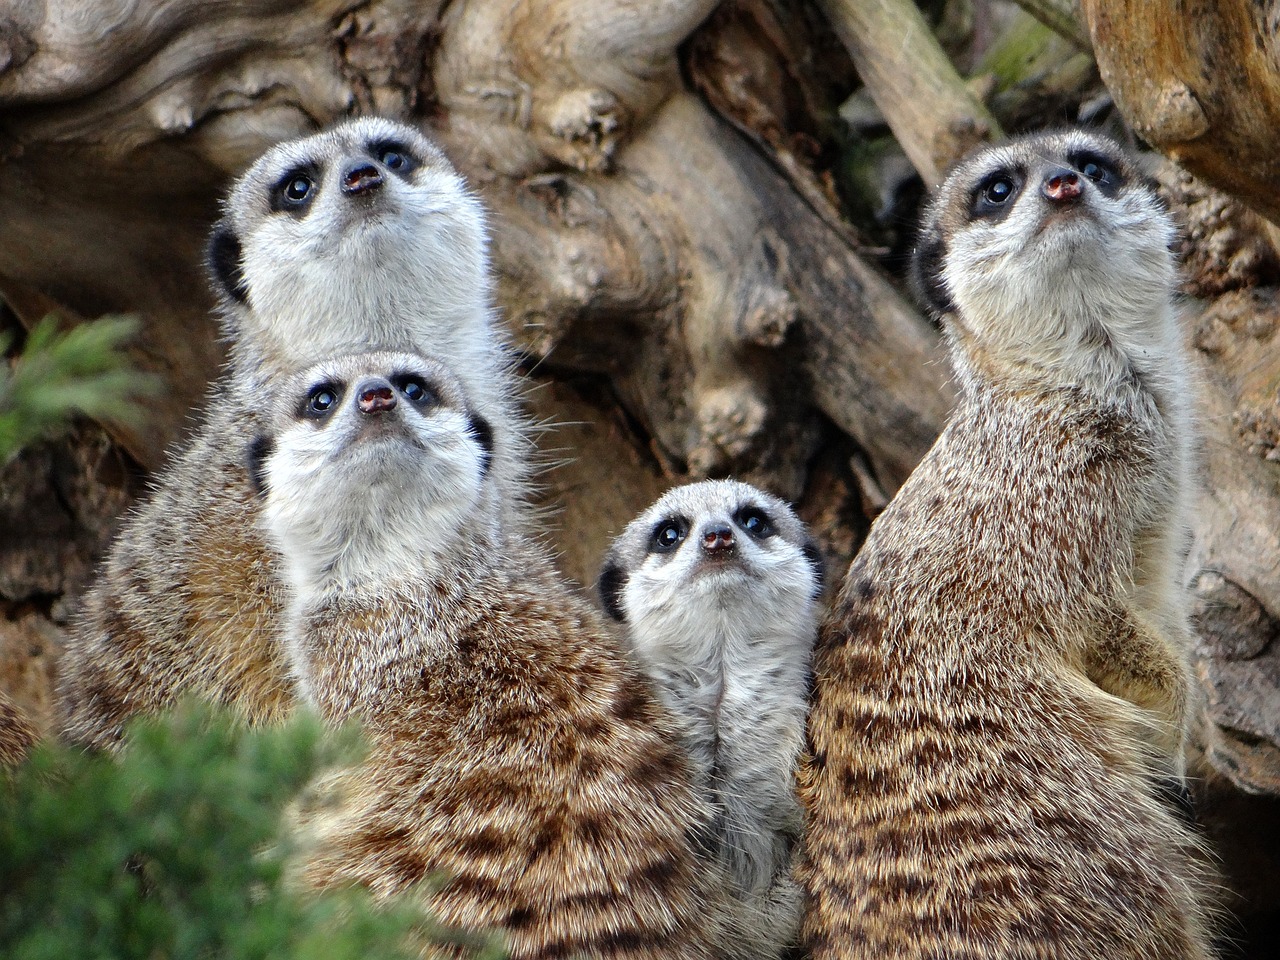 a group of meerkats standing next to each other, a portrait, pexels, sloth, avatar image, 4 eyes, 3 4 5 3 1